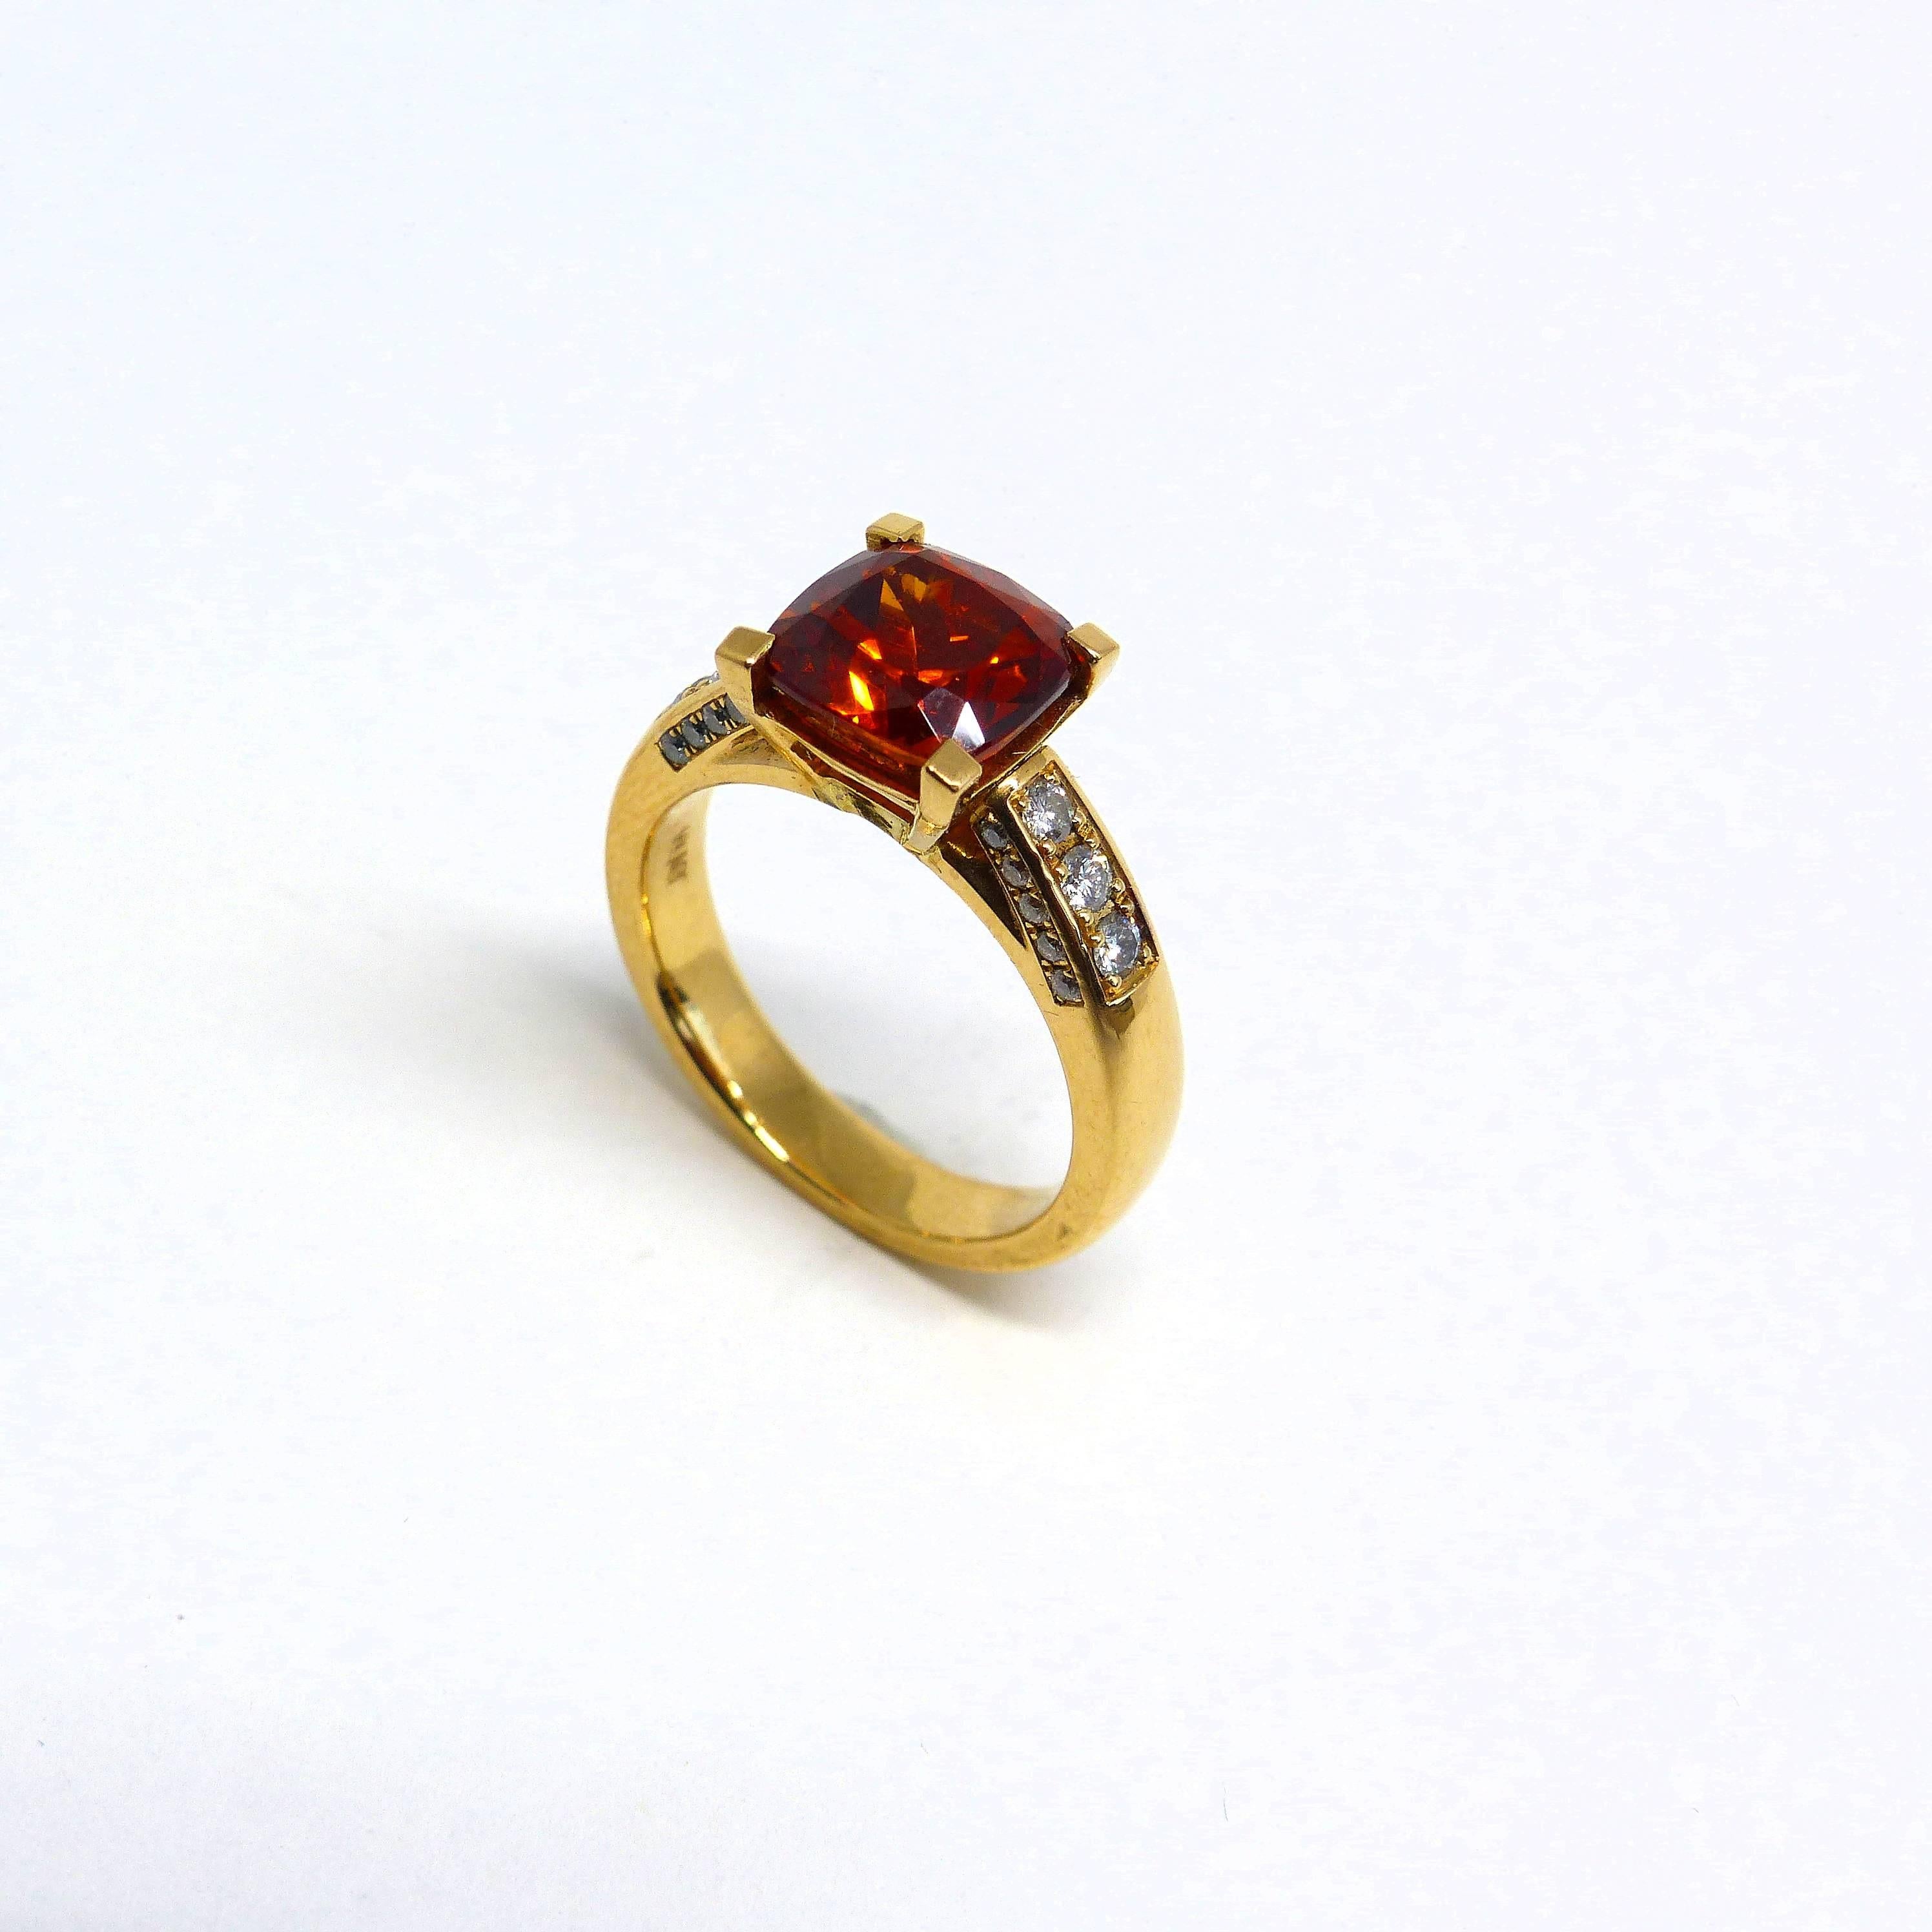 Cushion Cut Ring in Rose Gold with 1 Mandarine Garnet and Diamonds. For Sale